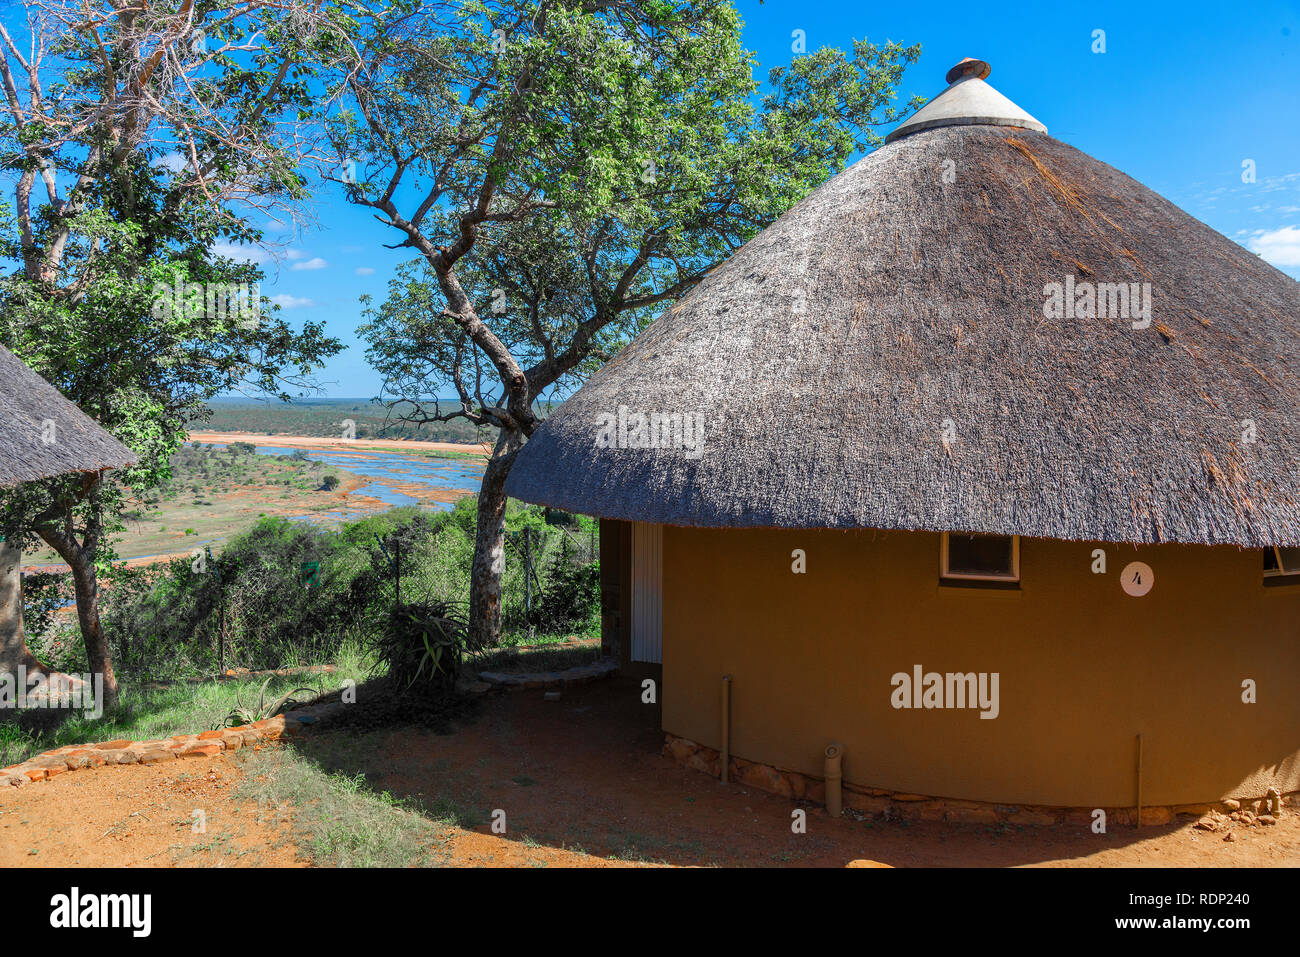 Traditional guest accommodation in thatched rondovals overlooking the Olifants River at Olifants Rest Camp, Kruger National Park, South Africa Stock Photo